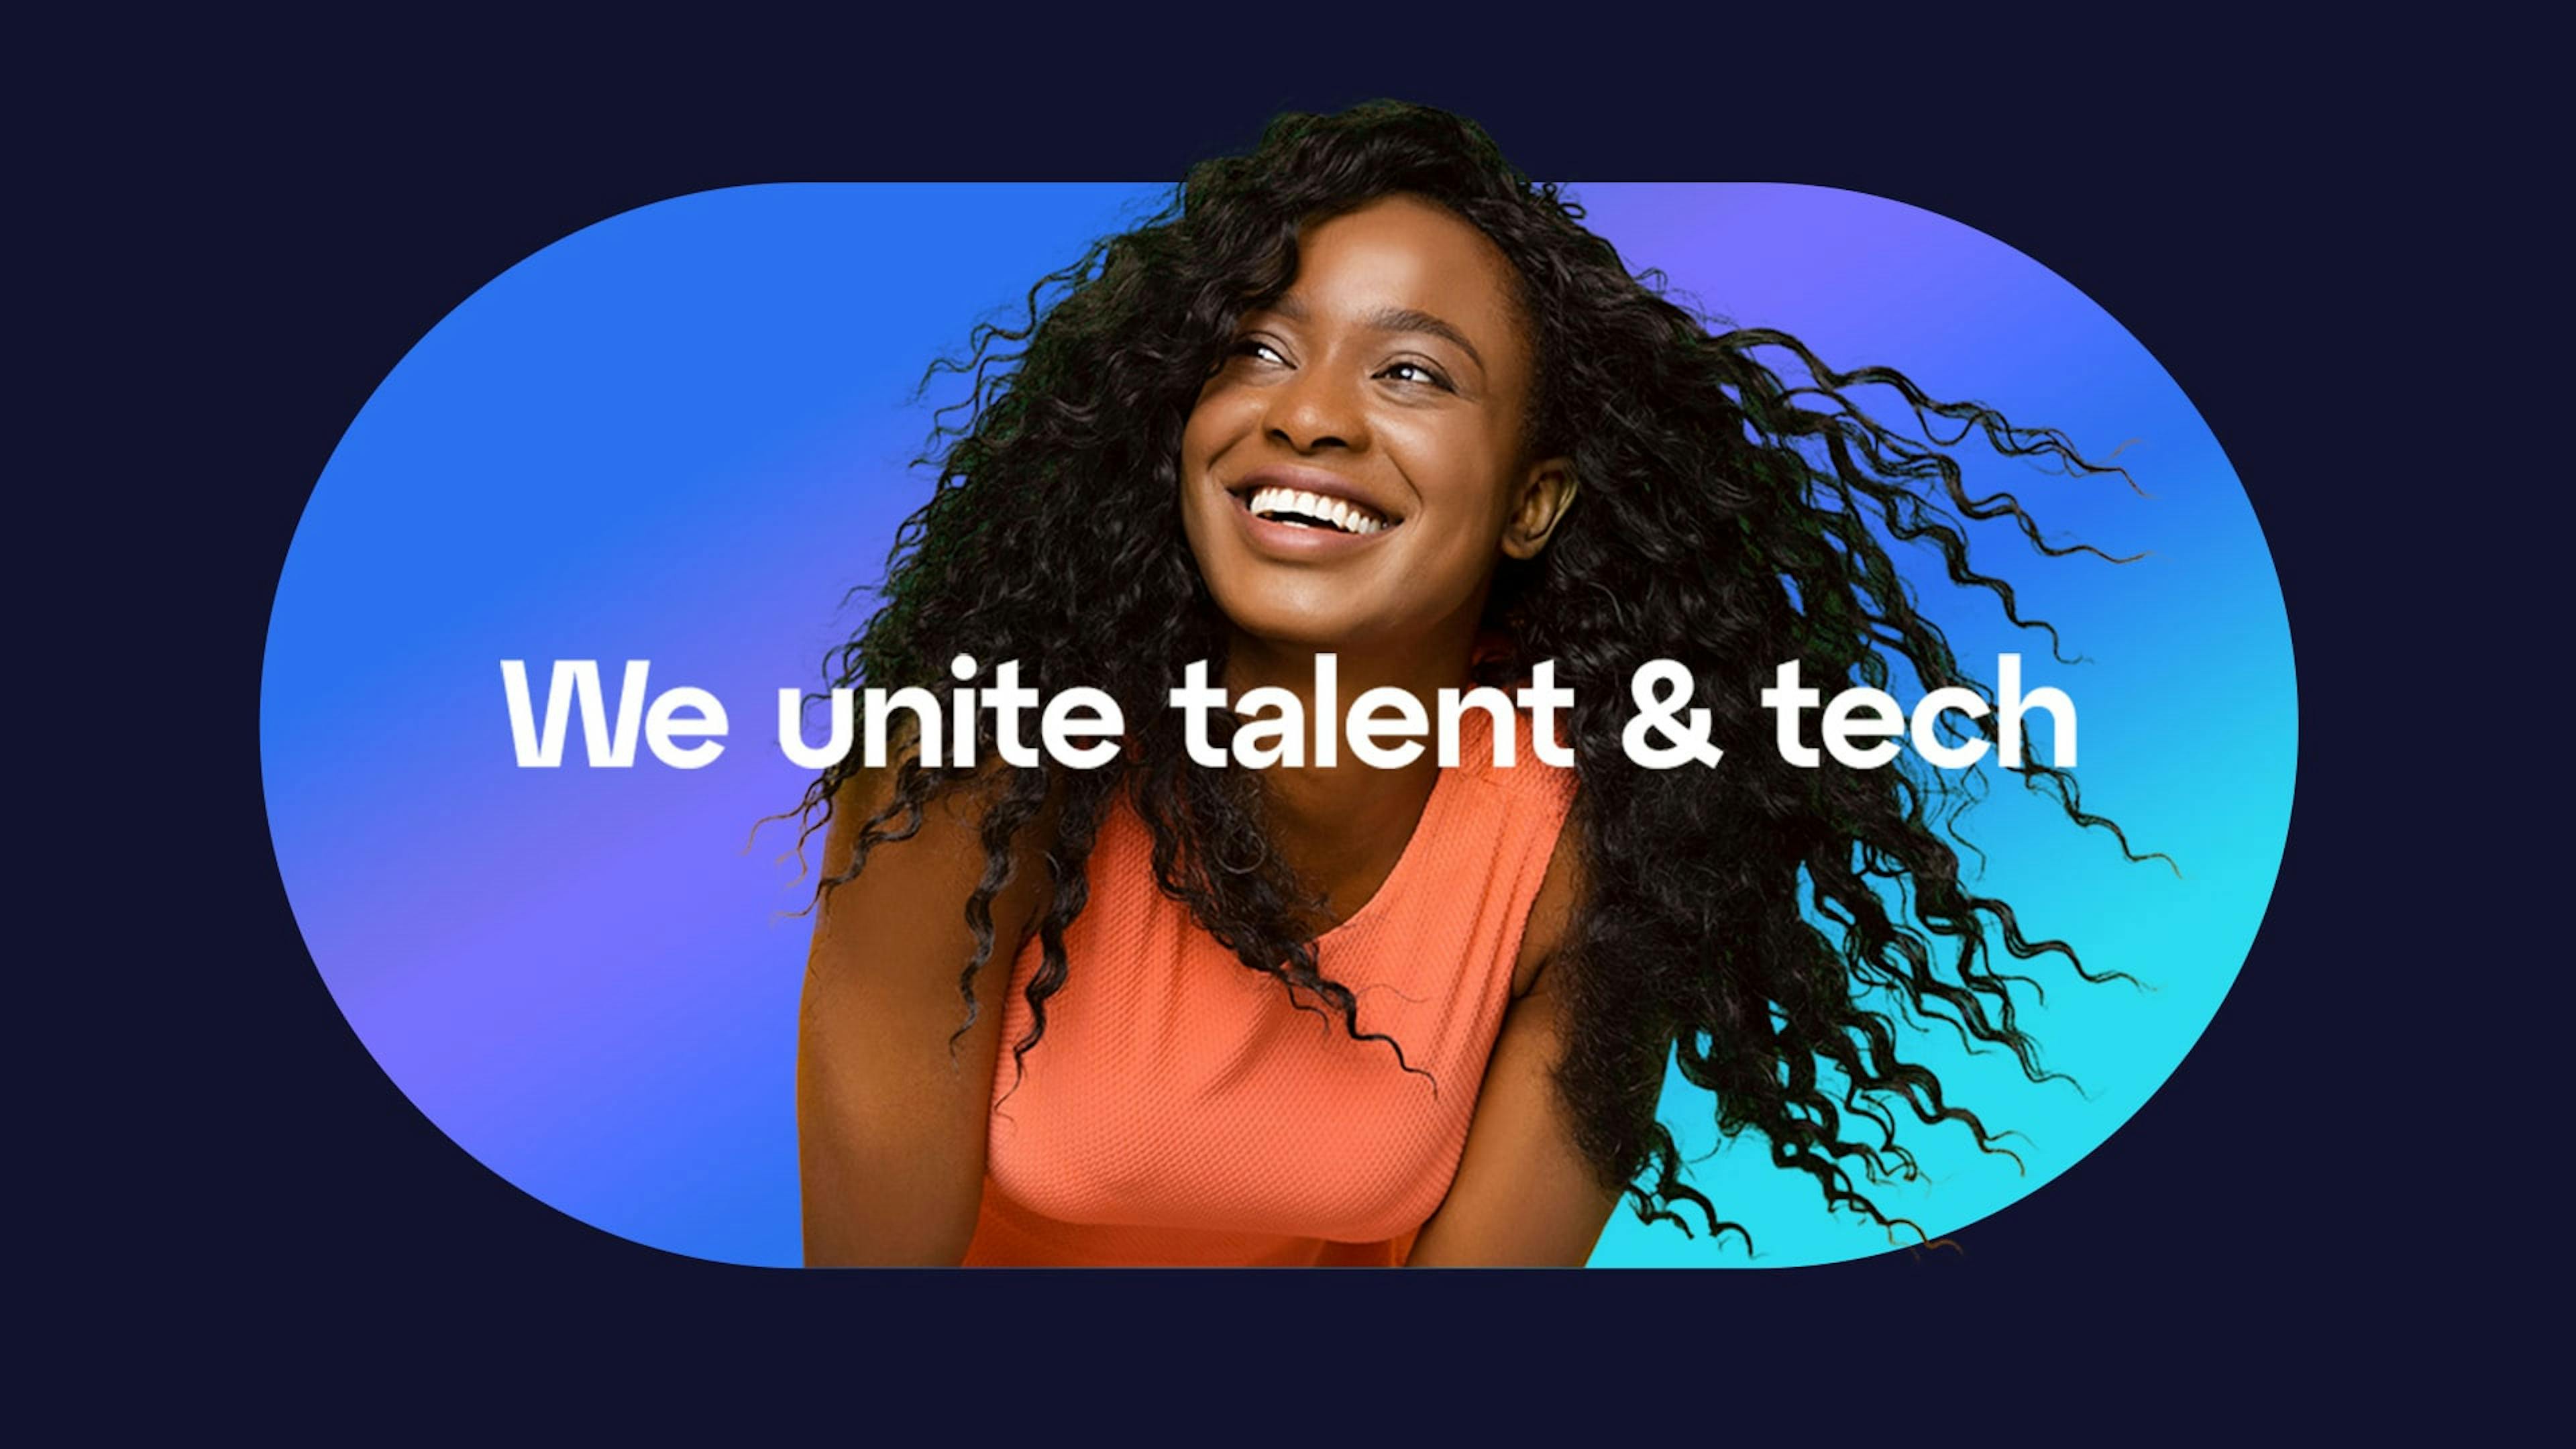 Woman featured against a blue background beside the text "We unite talent & tech," representing the Catapult Solutions Group's brand.